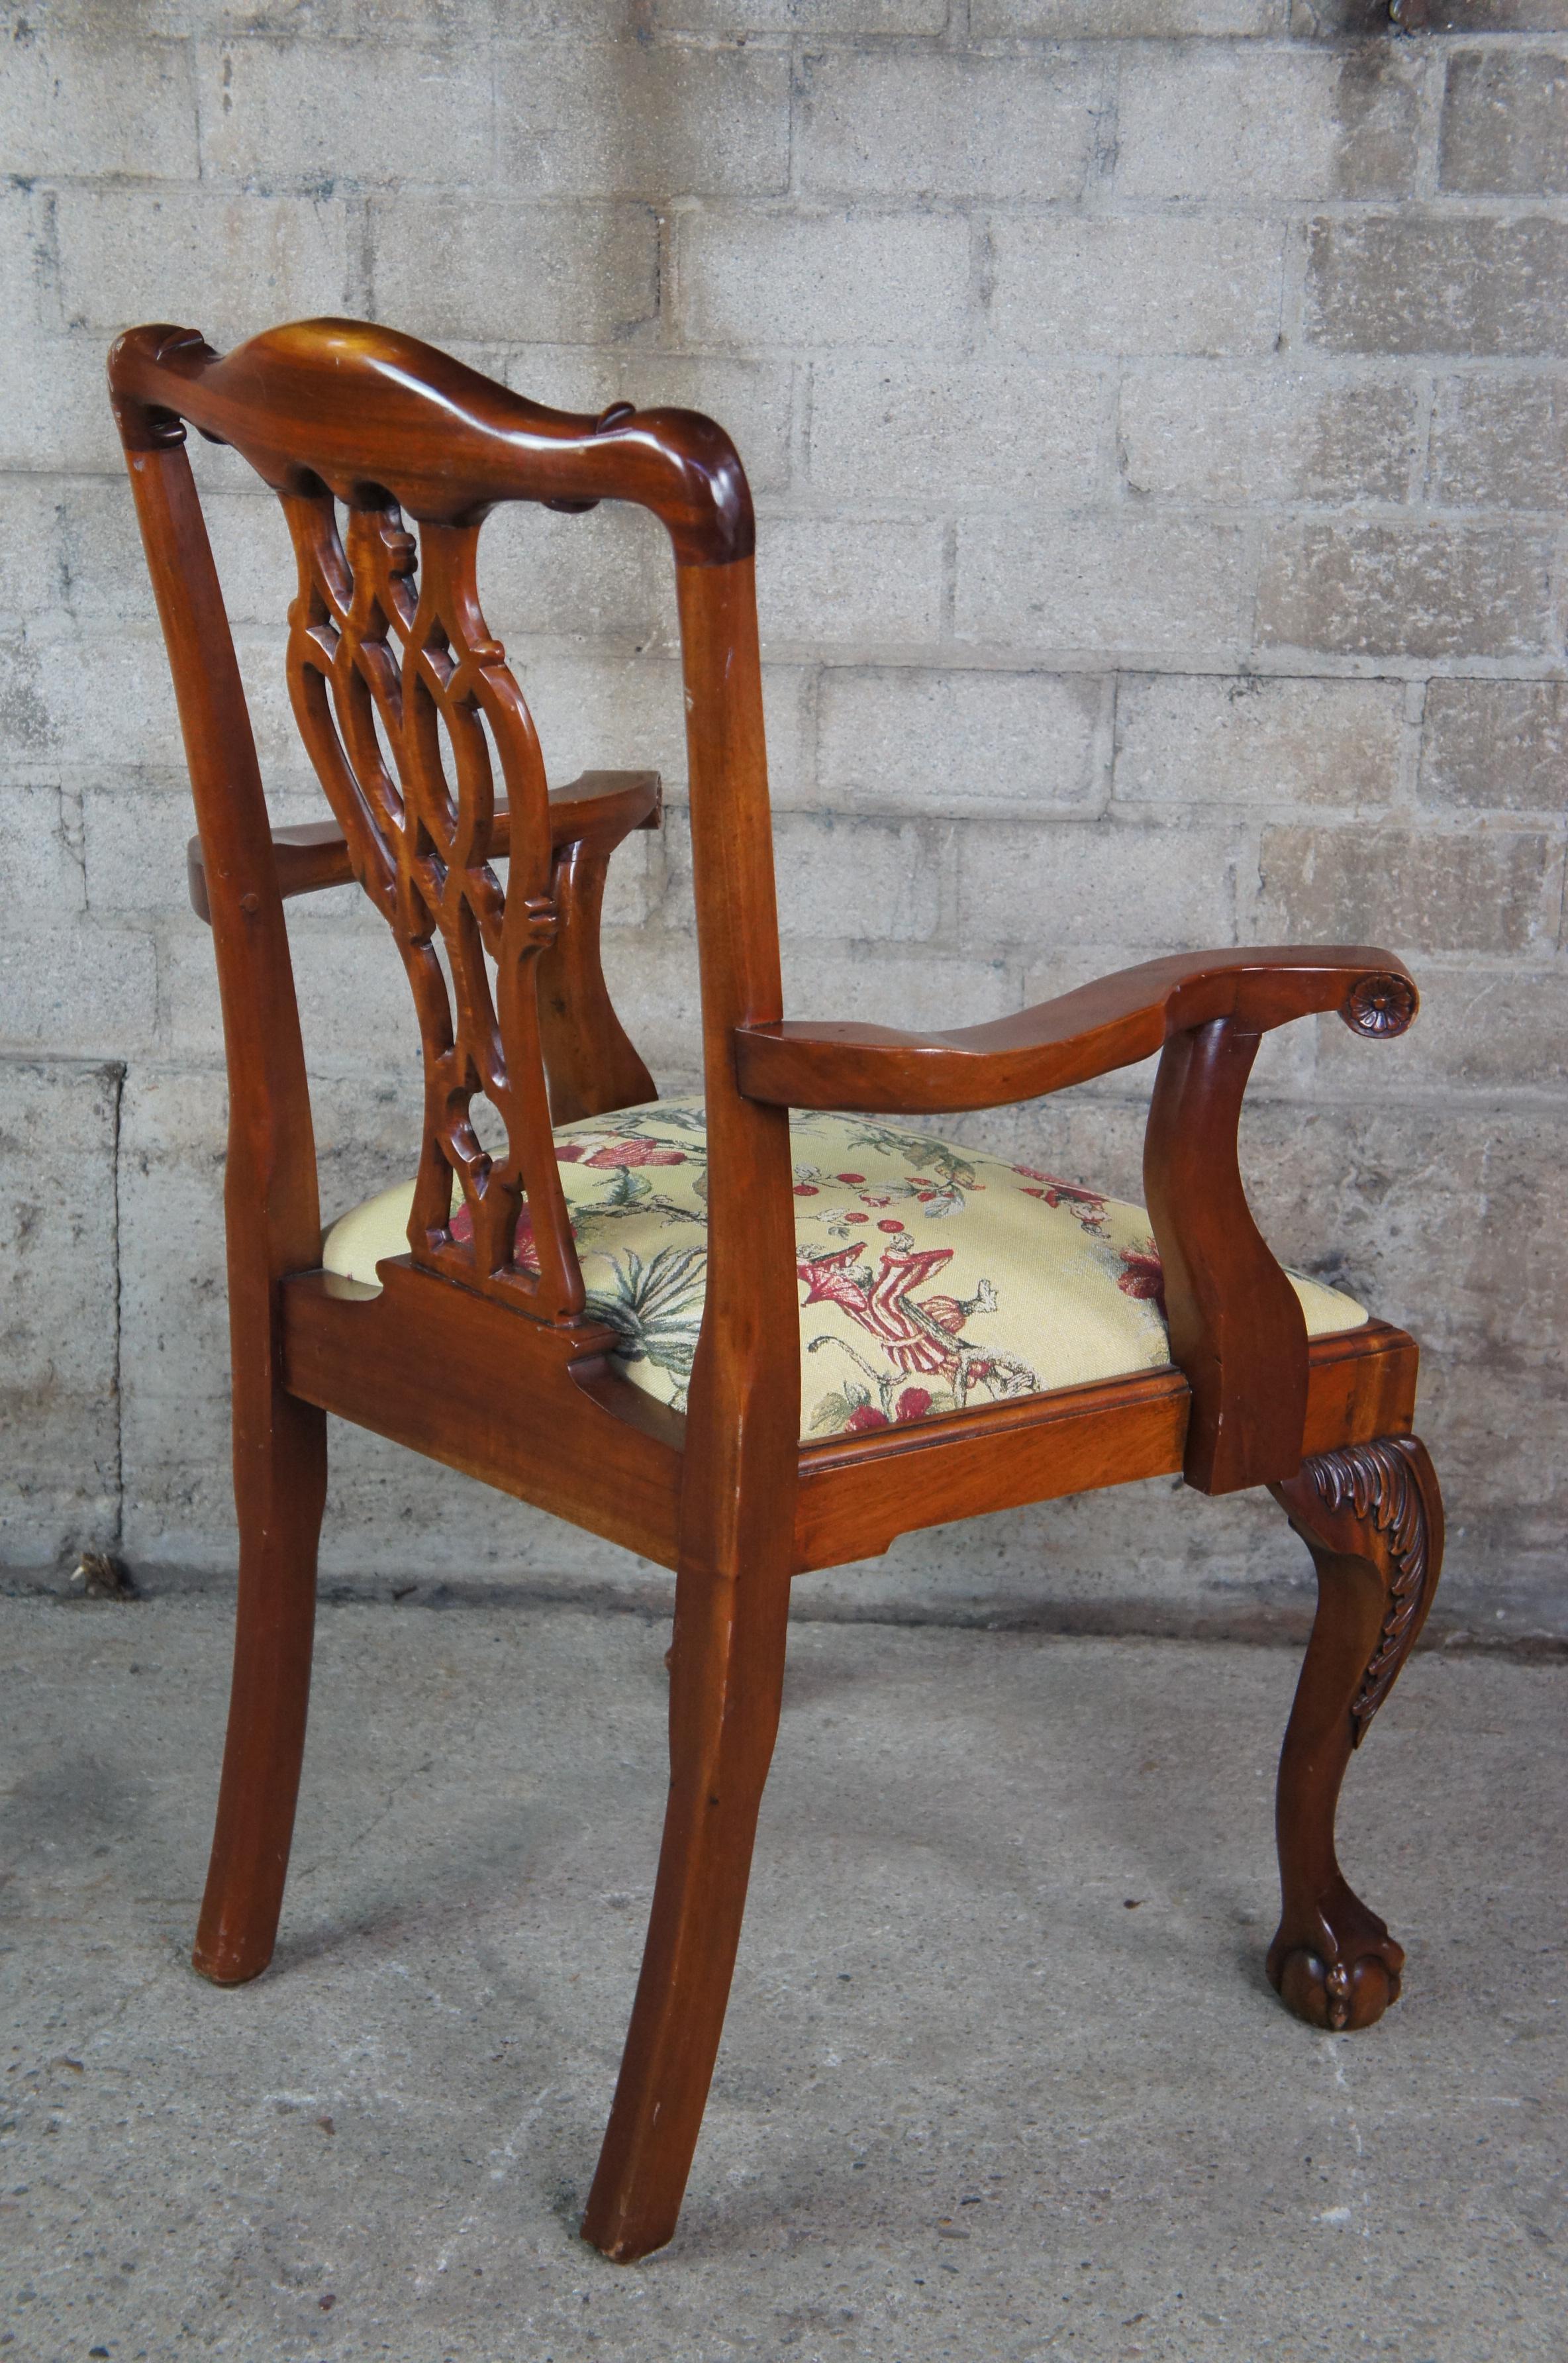 Upholstery 10 Vintage Chippendale Carved Mahogany Pretzel Back Ball & Claw Dining Chairs 